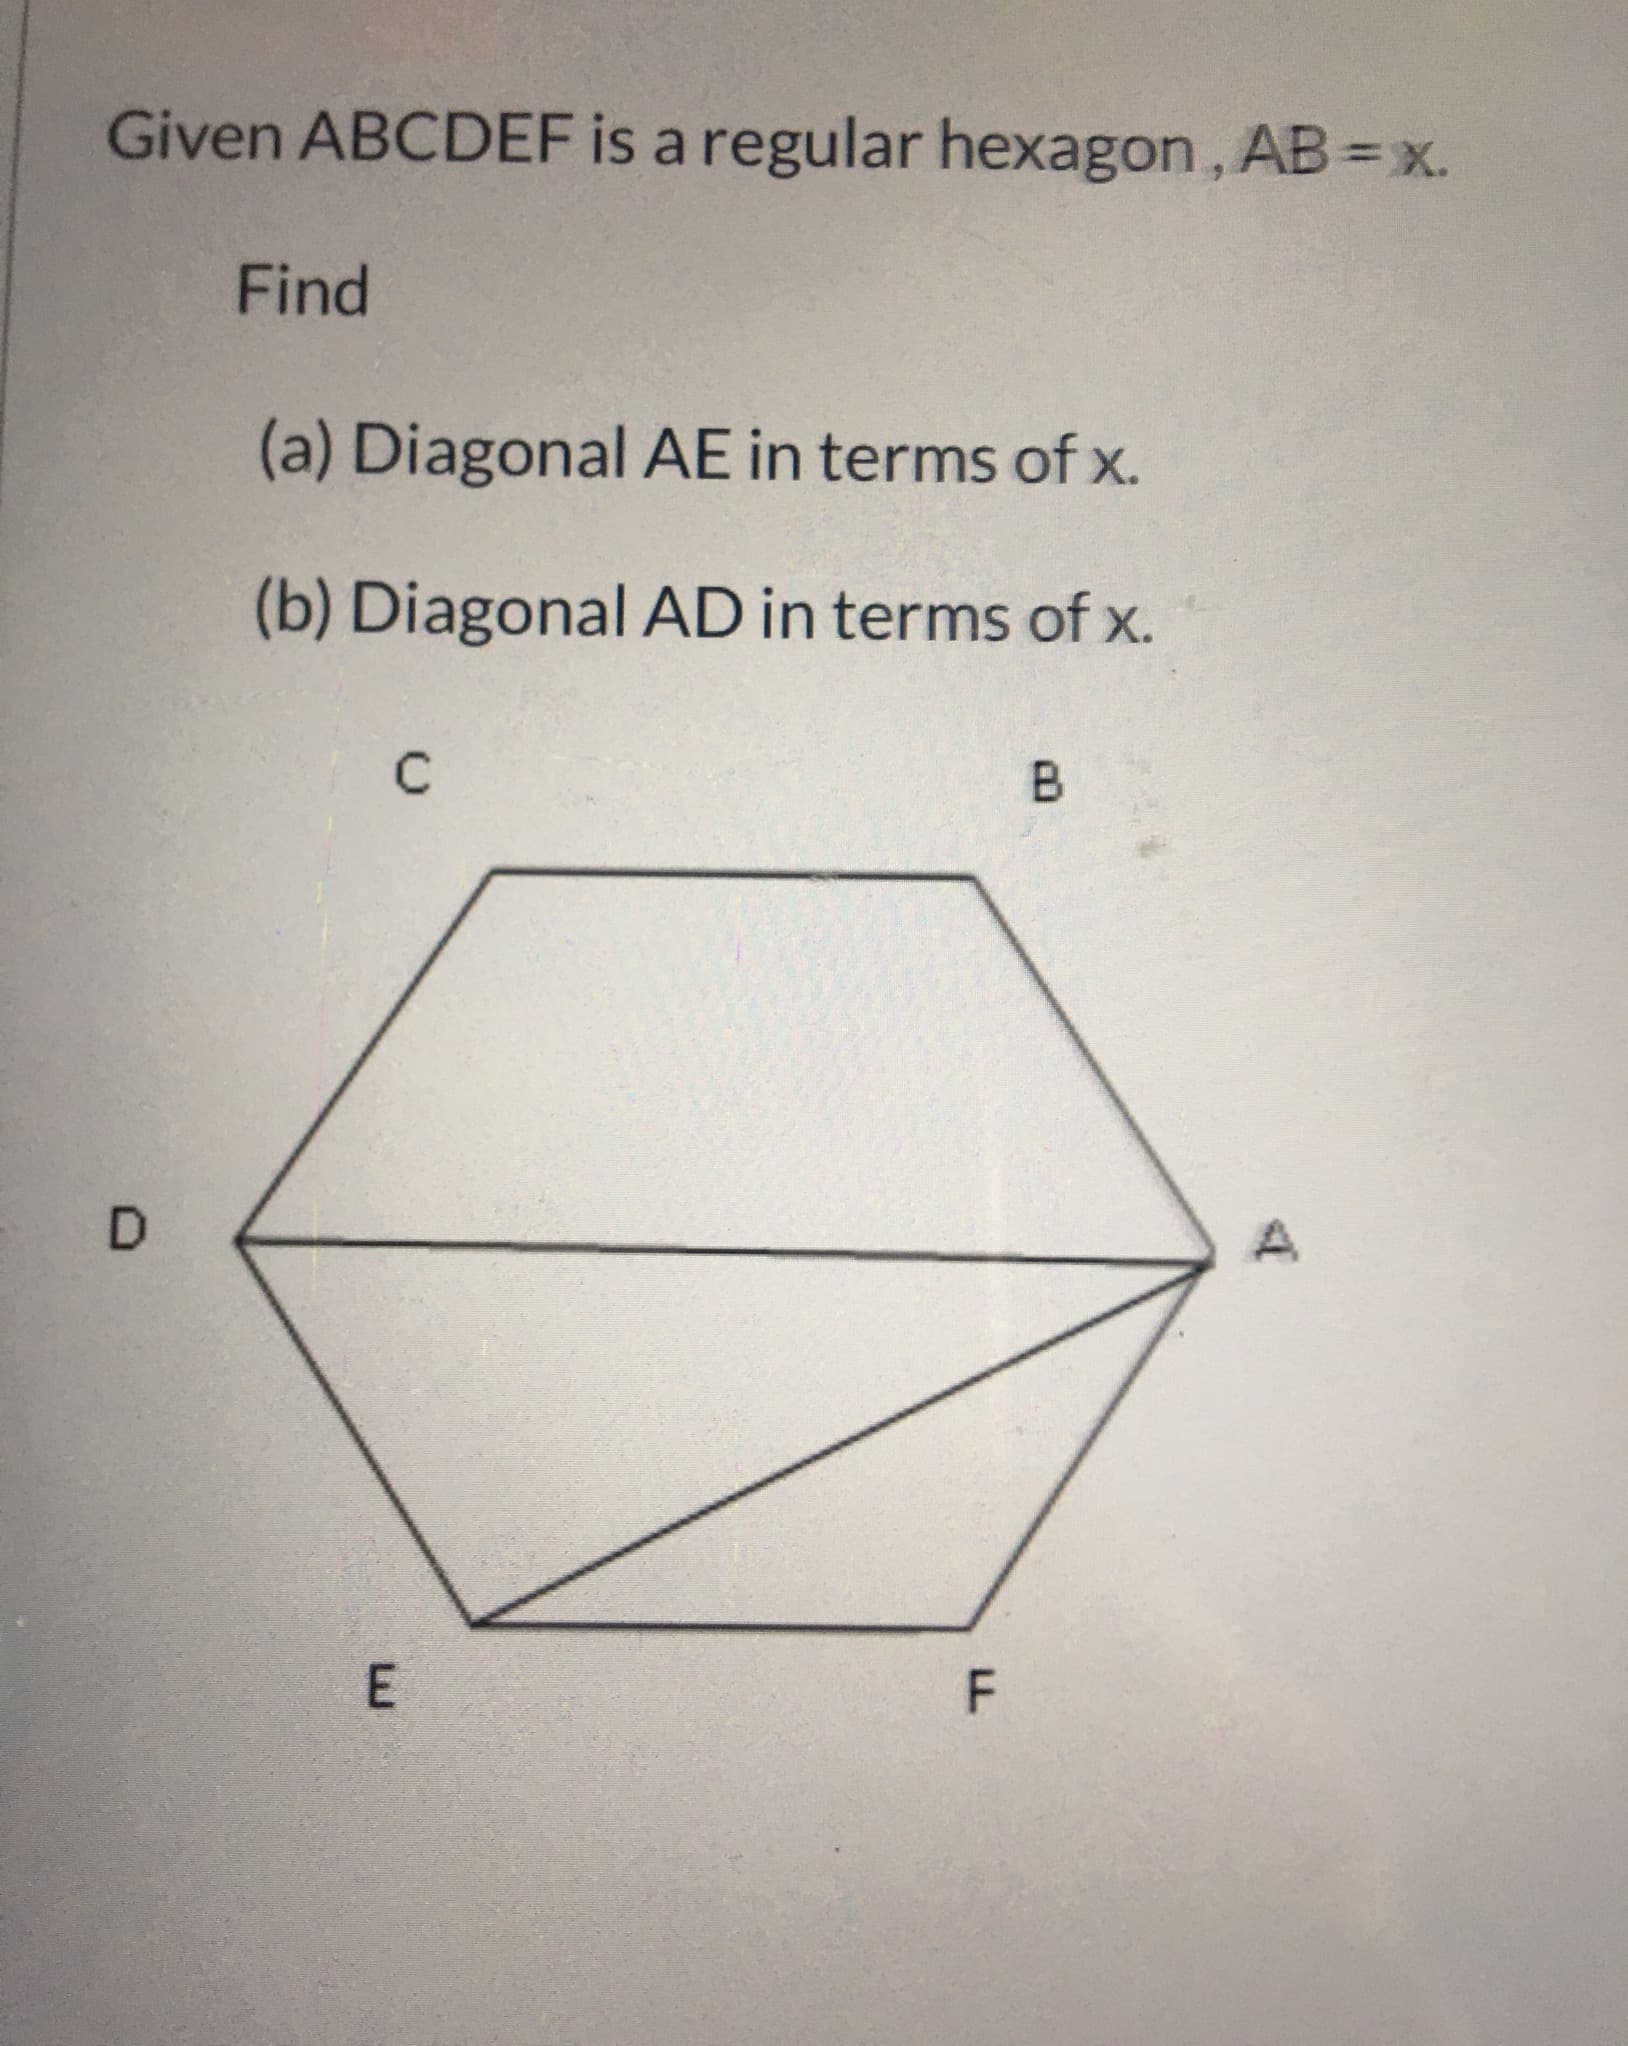 Given ABCDEF is a regular hexagon, AB=x.
Find
(a) Diagonal AE in terms of x.
(b) Diagonal AD in terms of x.
D
FL
E.
